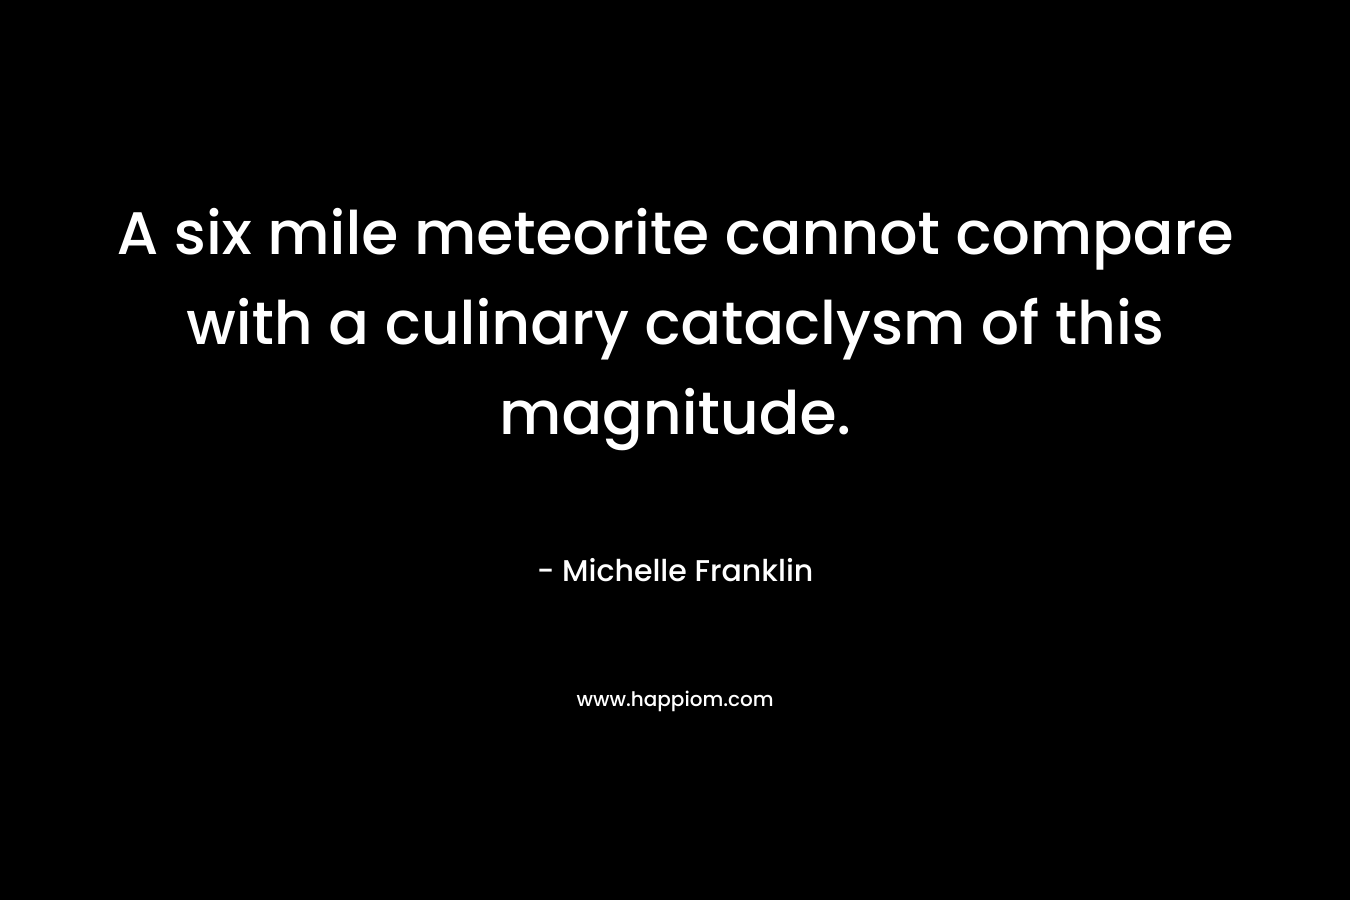 A six mile meteorite cannot compare with a culinary cataclysm of this magnitude. – Michelle Franklin